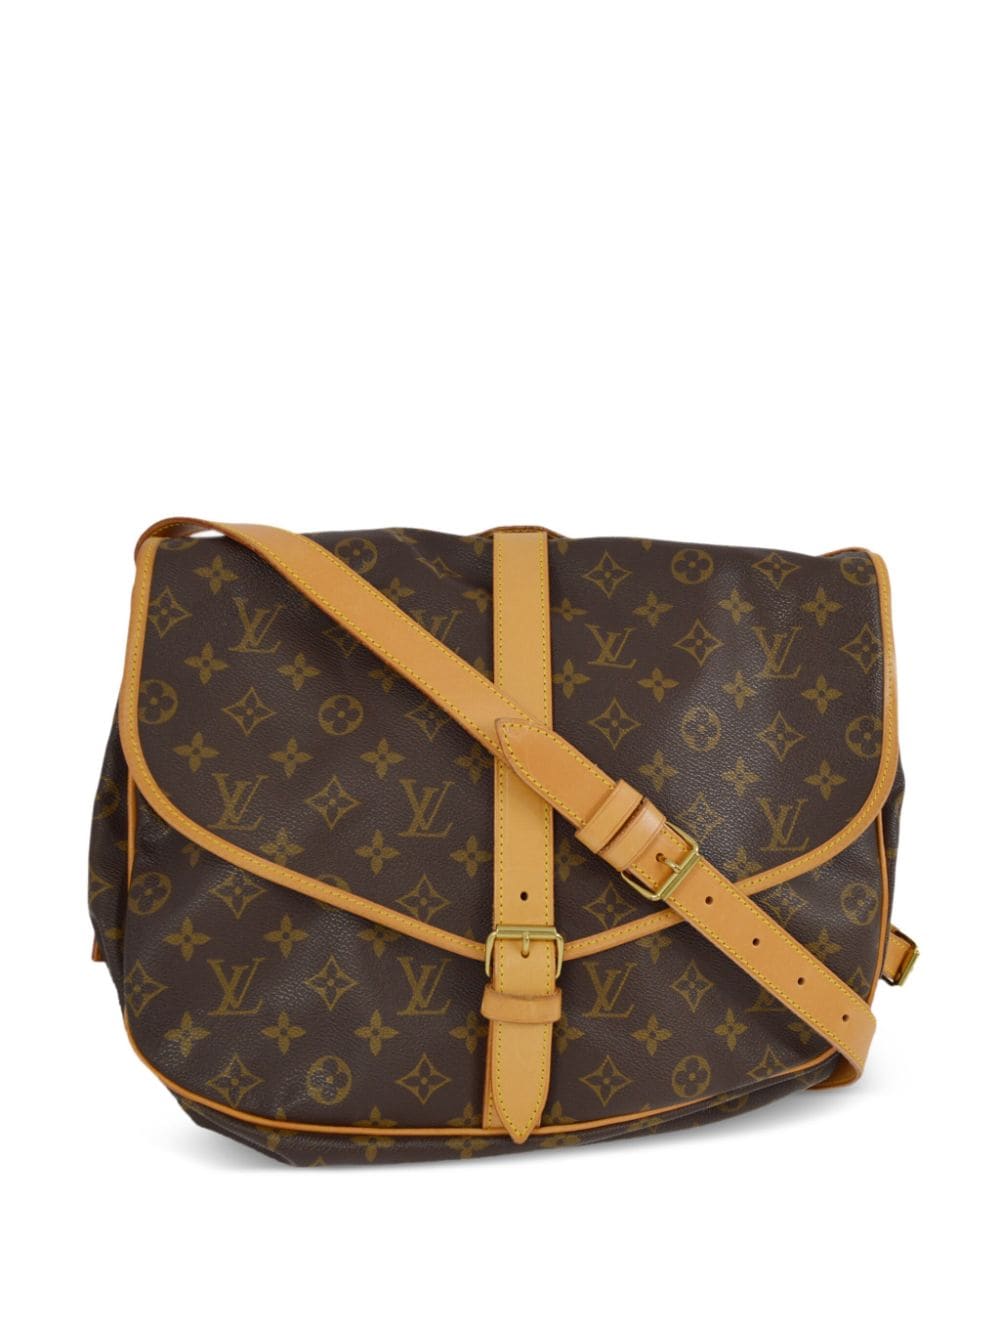 Pre-owned Louis Vuitton Saumur 35 邮差包（1994年典藏款） In Brown